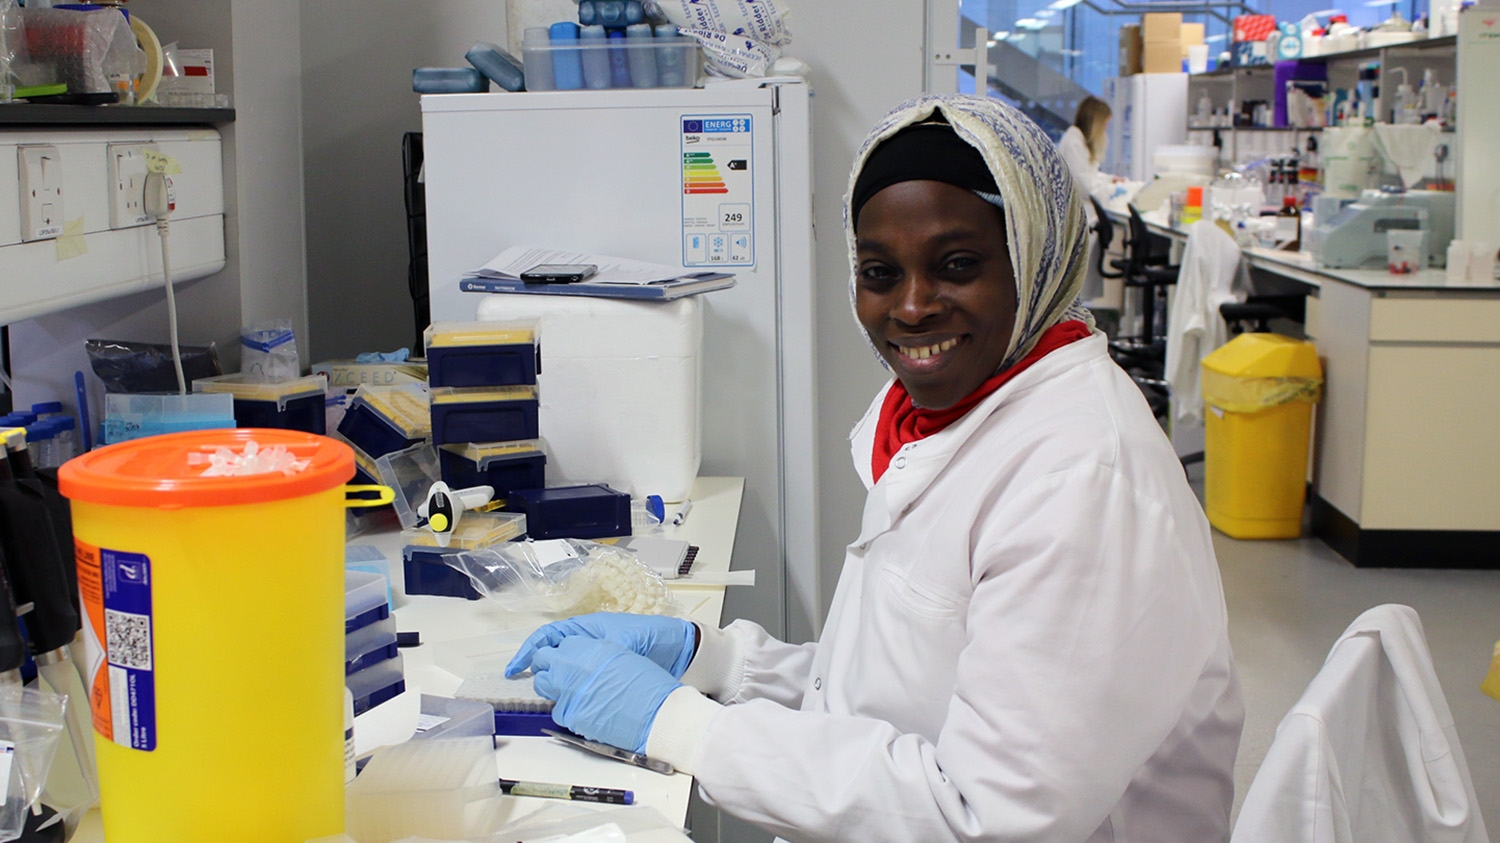 Lab technician Jamila analyses samples for lymphatic filariasis in a lab at Liverpool School of Tropical Medicine.